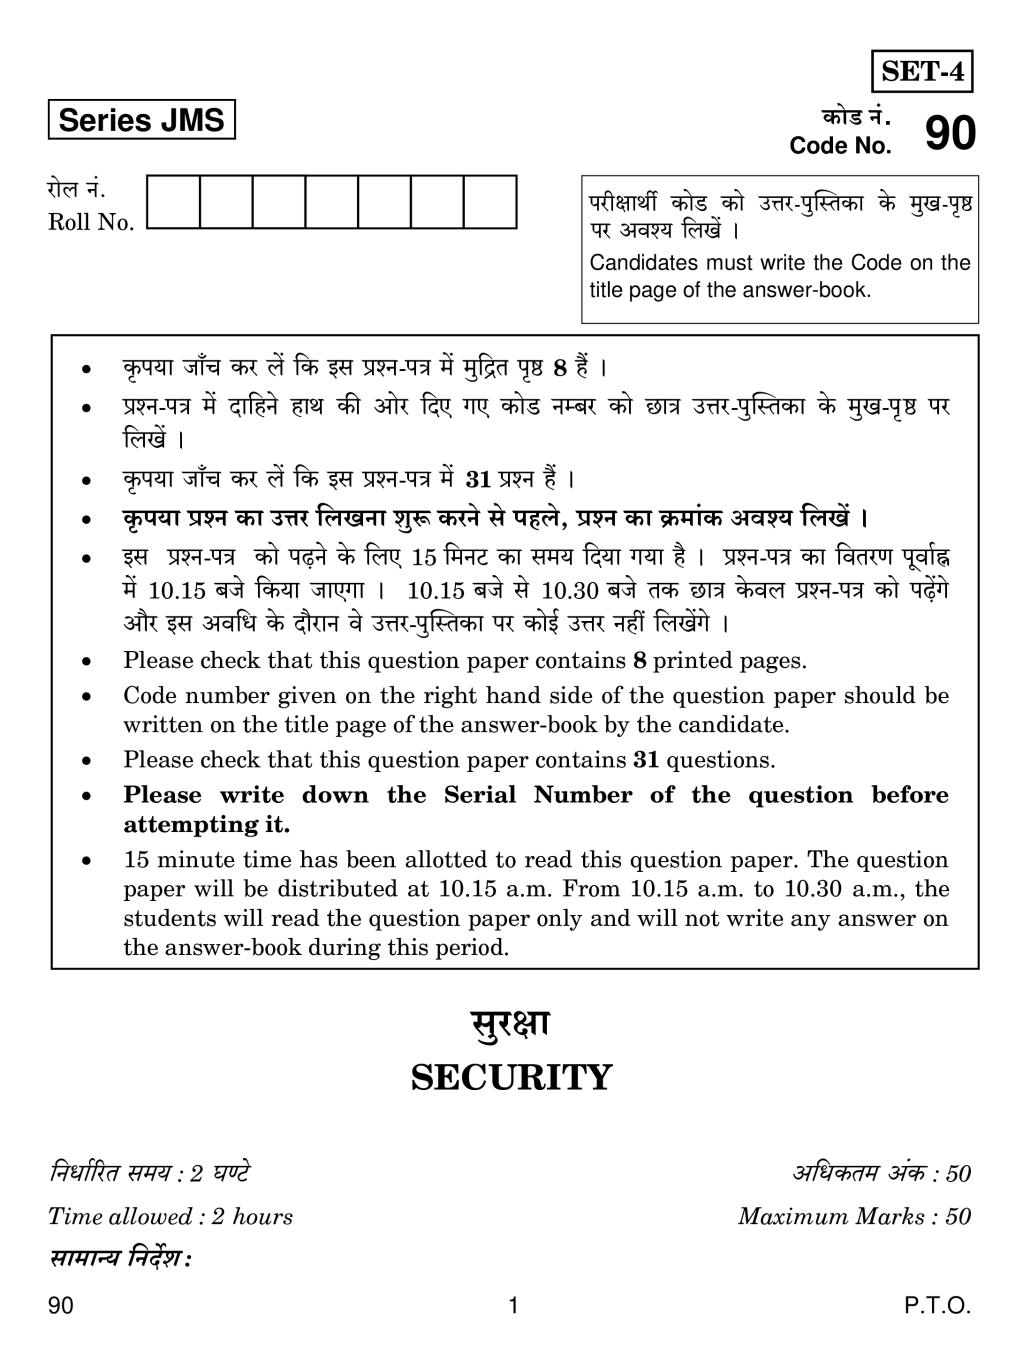 CBSE Class 10 Security Question Paper 2019 - Page 1